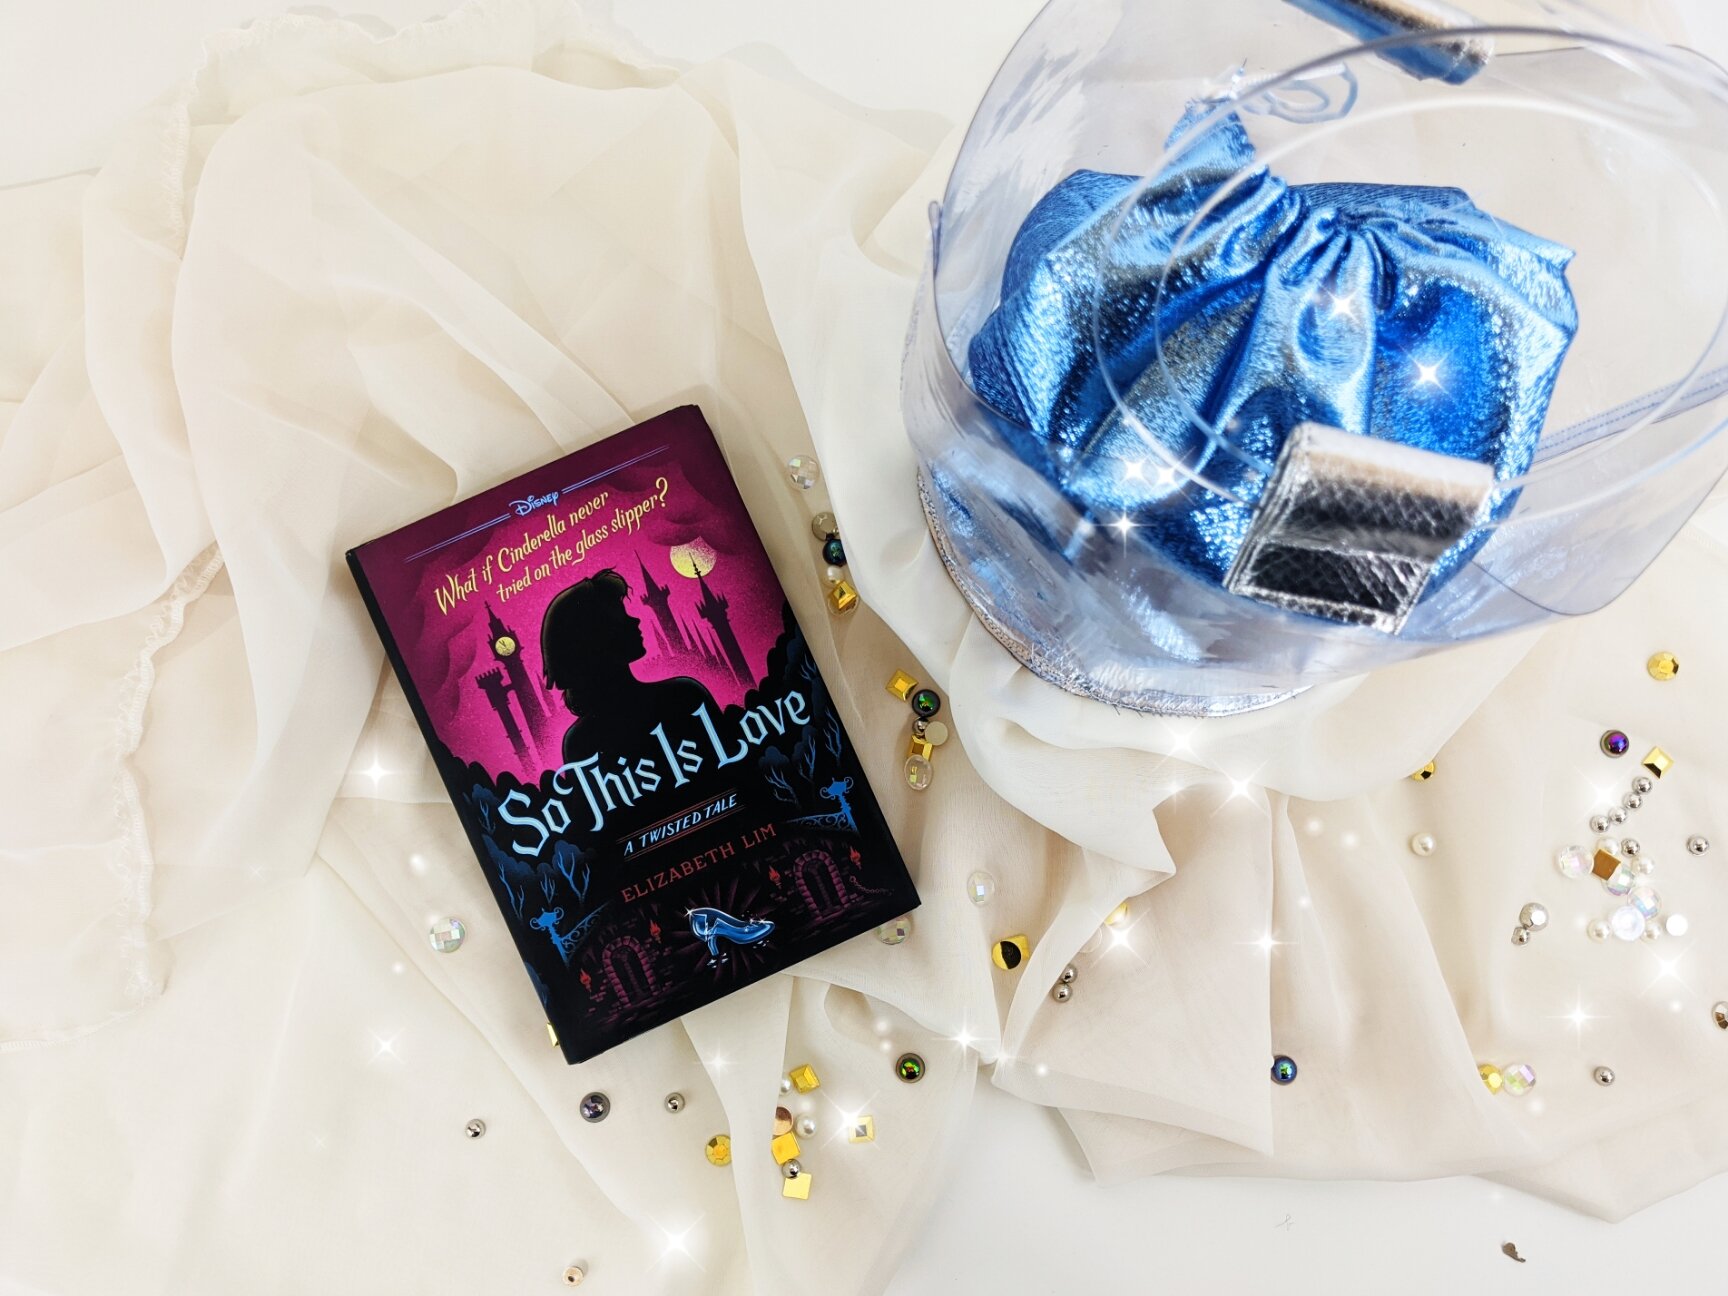 So This is Love A Twisted Tale by Elizabeth Lim - A Twisted Tale -  Cinderella, Disney, Princess Books